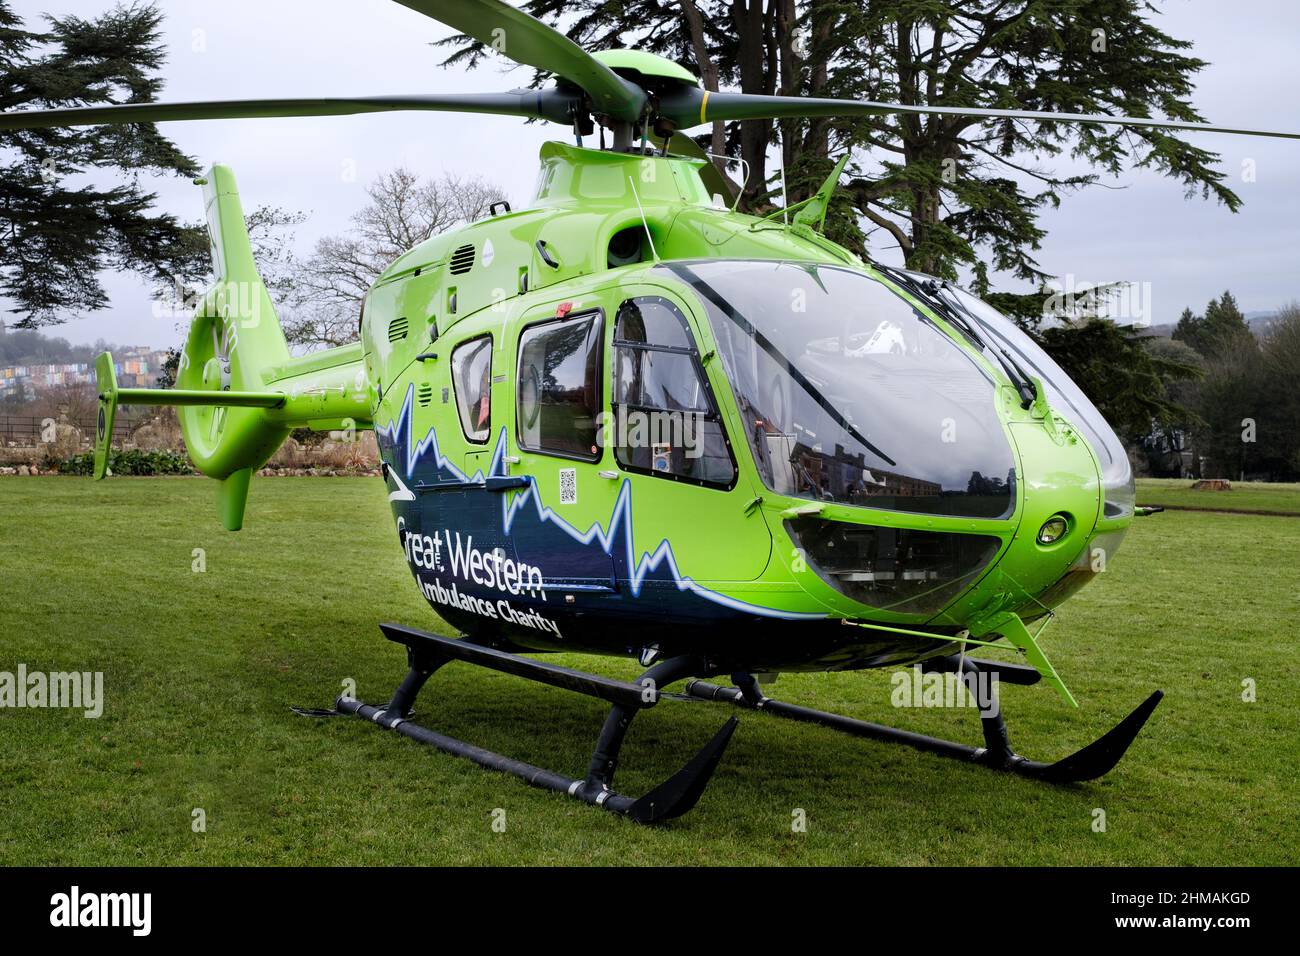 The Great Western Air Ambulance, based in Bristol on the ground at The Ashton Court Estate. The air ambulance is a Airbus eurocopter known as Helimed Stock Photo